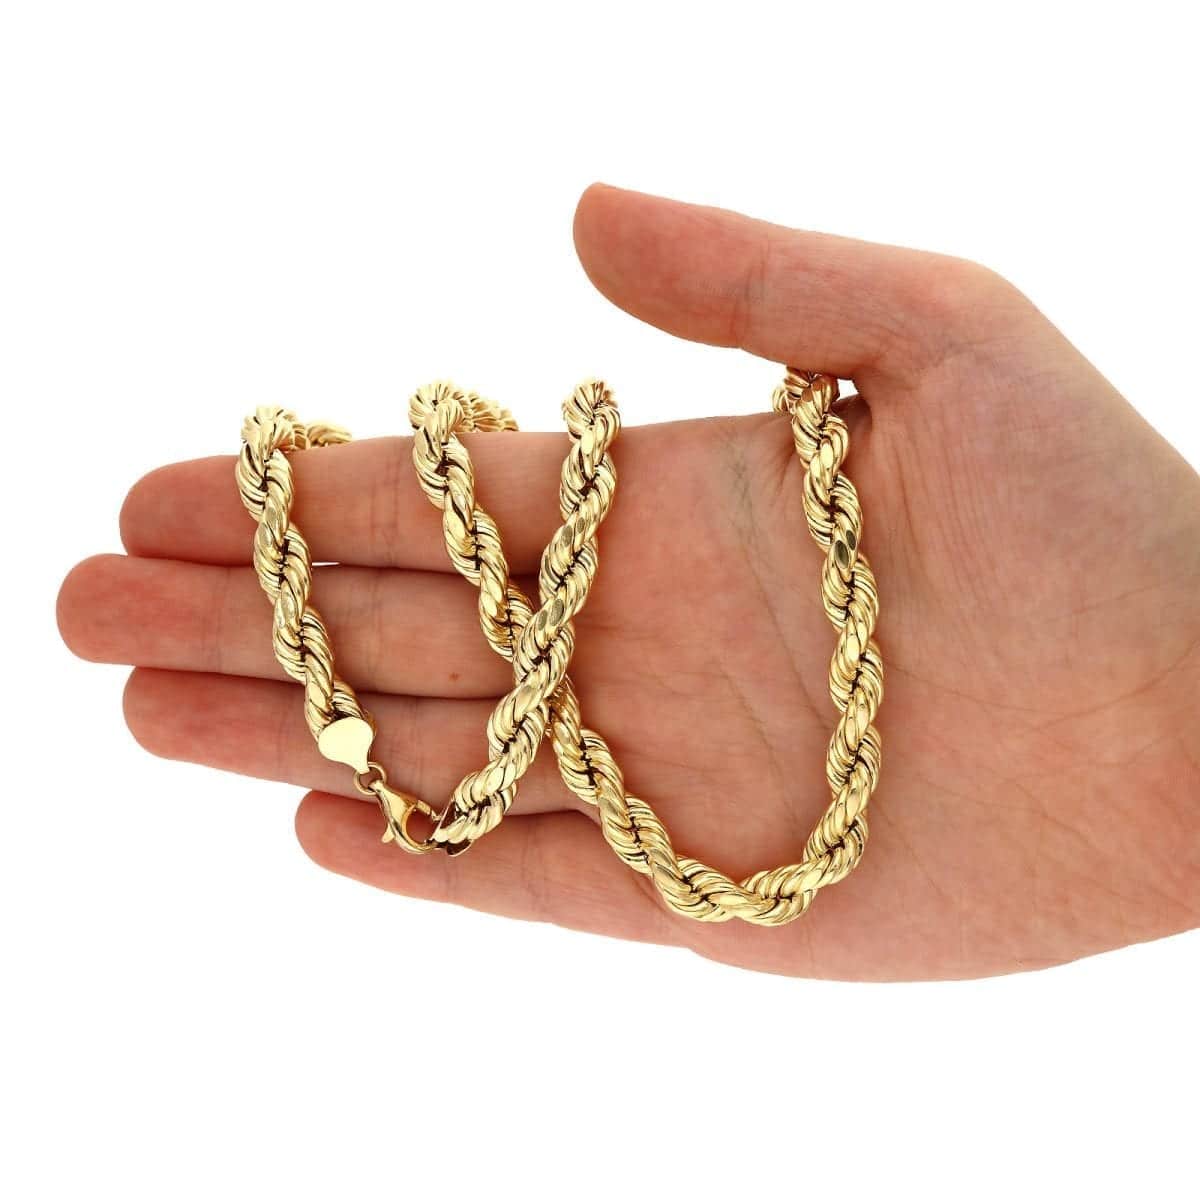 Men's Women's Real 14k Yellow Gold Hollow Rope Chain Necklace 1.5mm-4.5mm  16-30